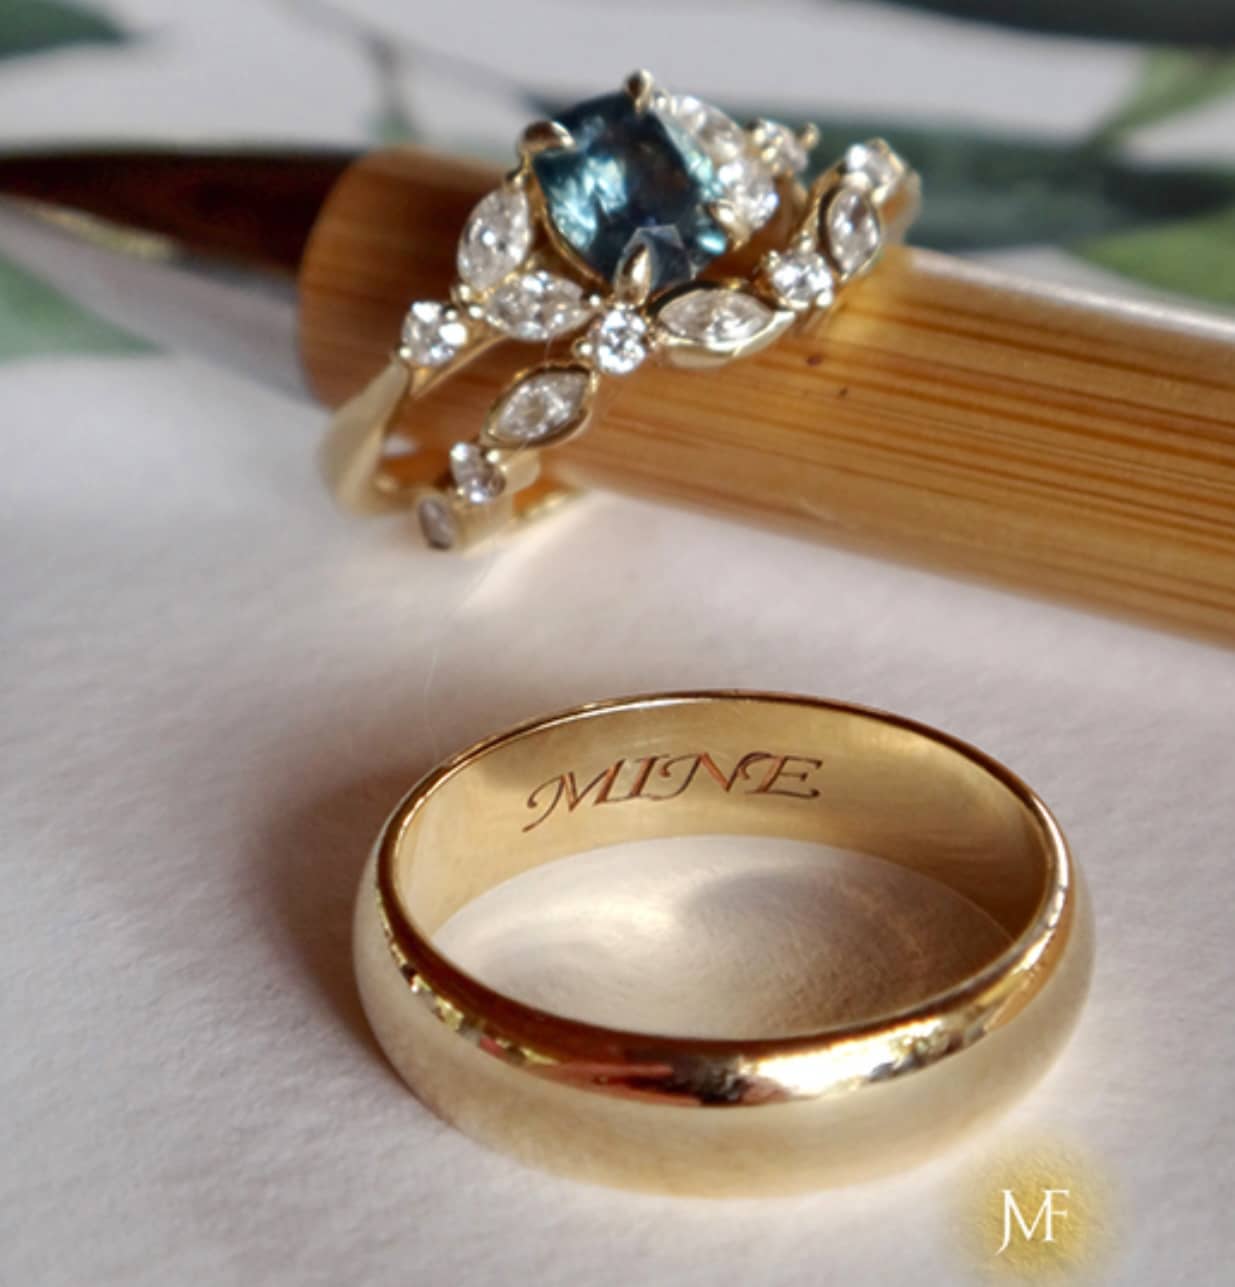 A photo from a customer review featuring The "Cattleya" ring in 14k yellow gold with 1.40-carat Montana sapphire; the Thames band in 14k yellow gold; and the classic standard-fit band in 14k yellow gold